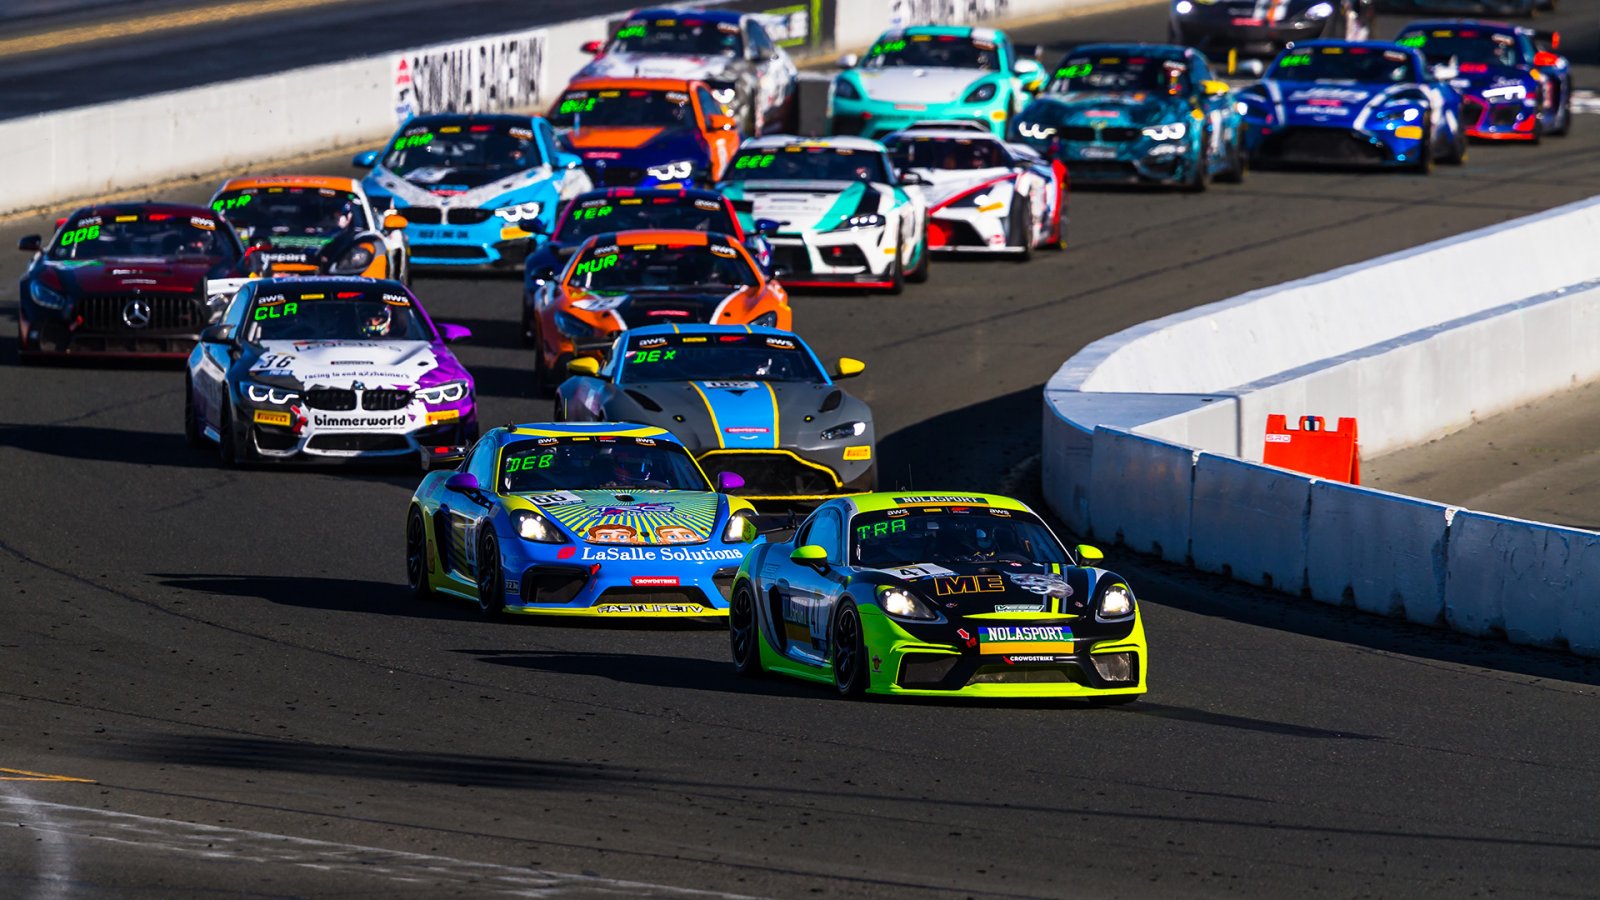 A Texas-Sized 37-Car Field Entered for Pirelli GT4 America at Circuit of the Americas